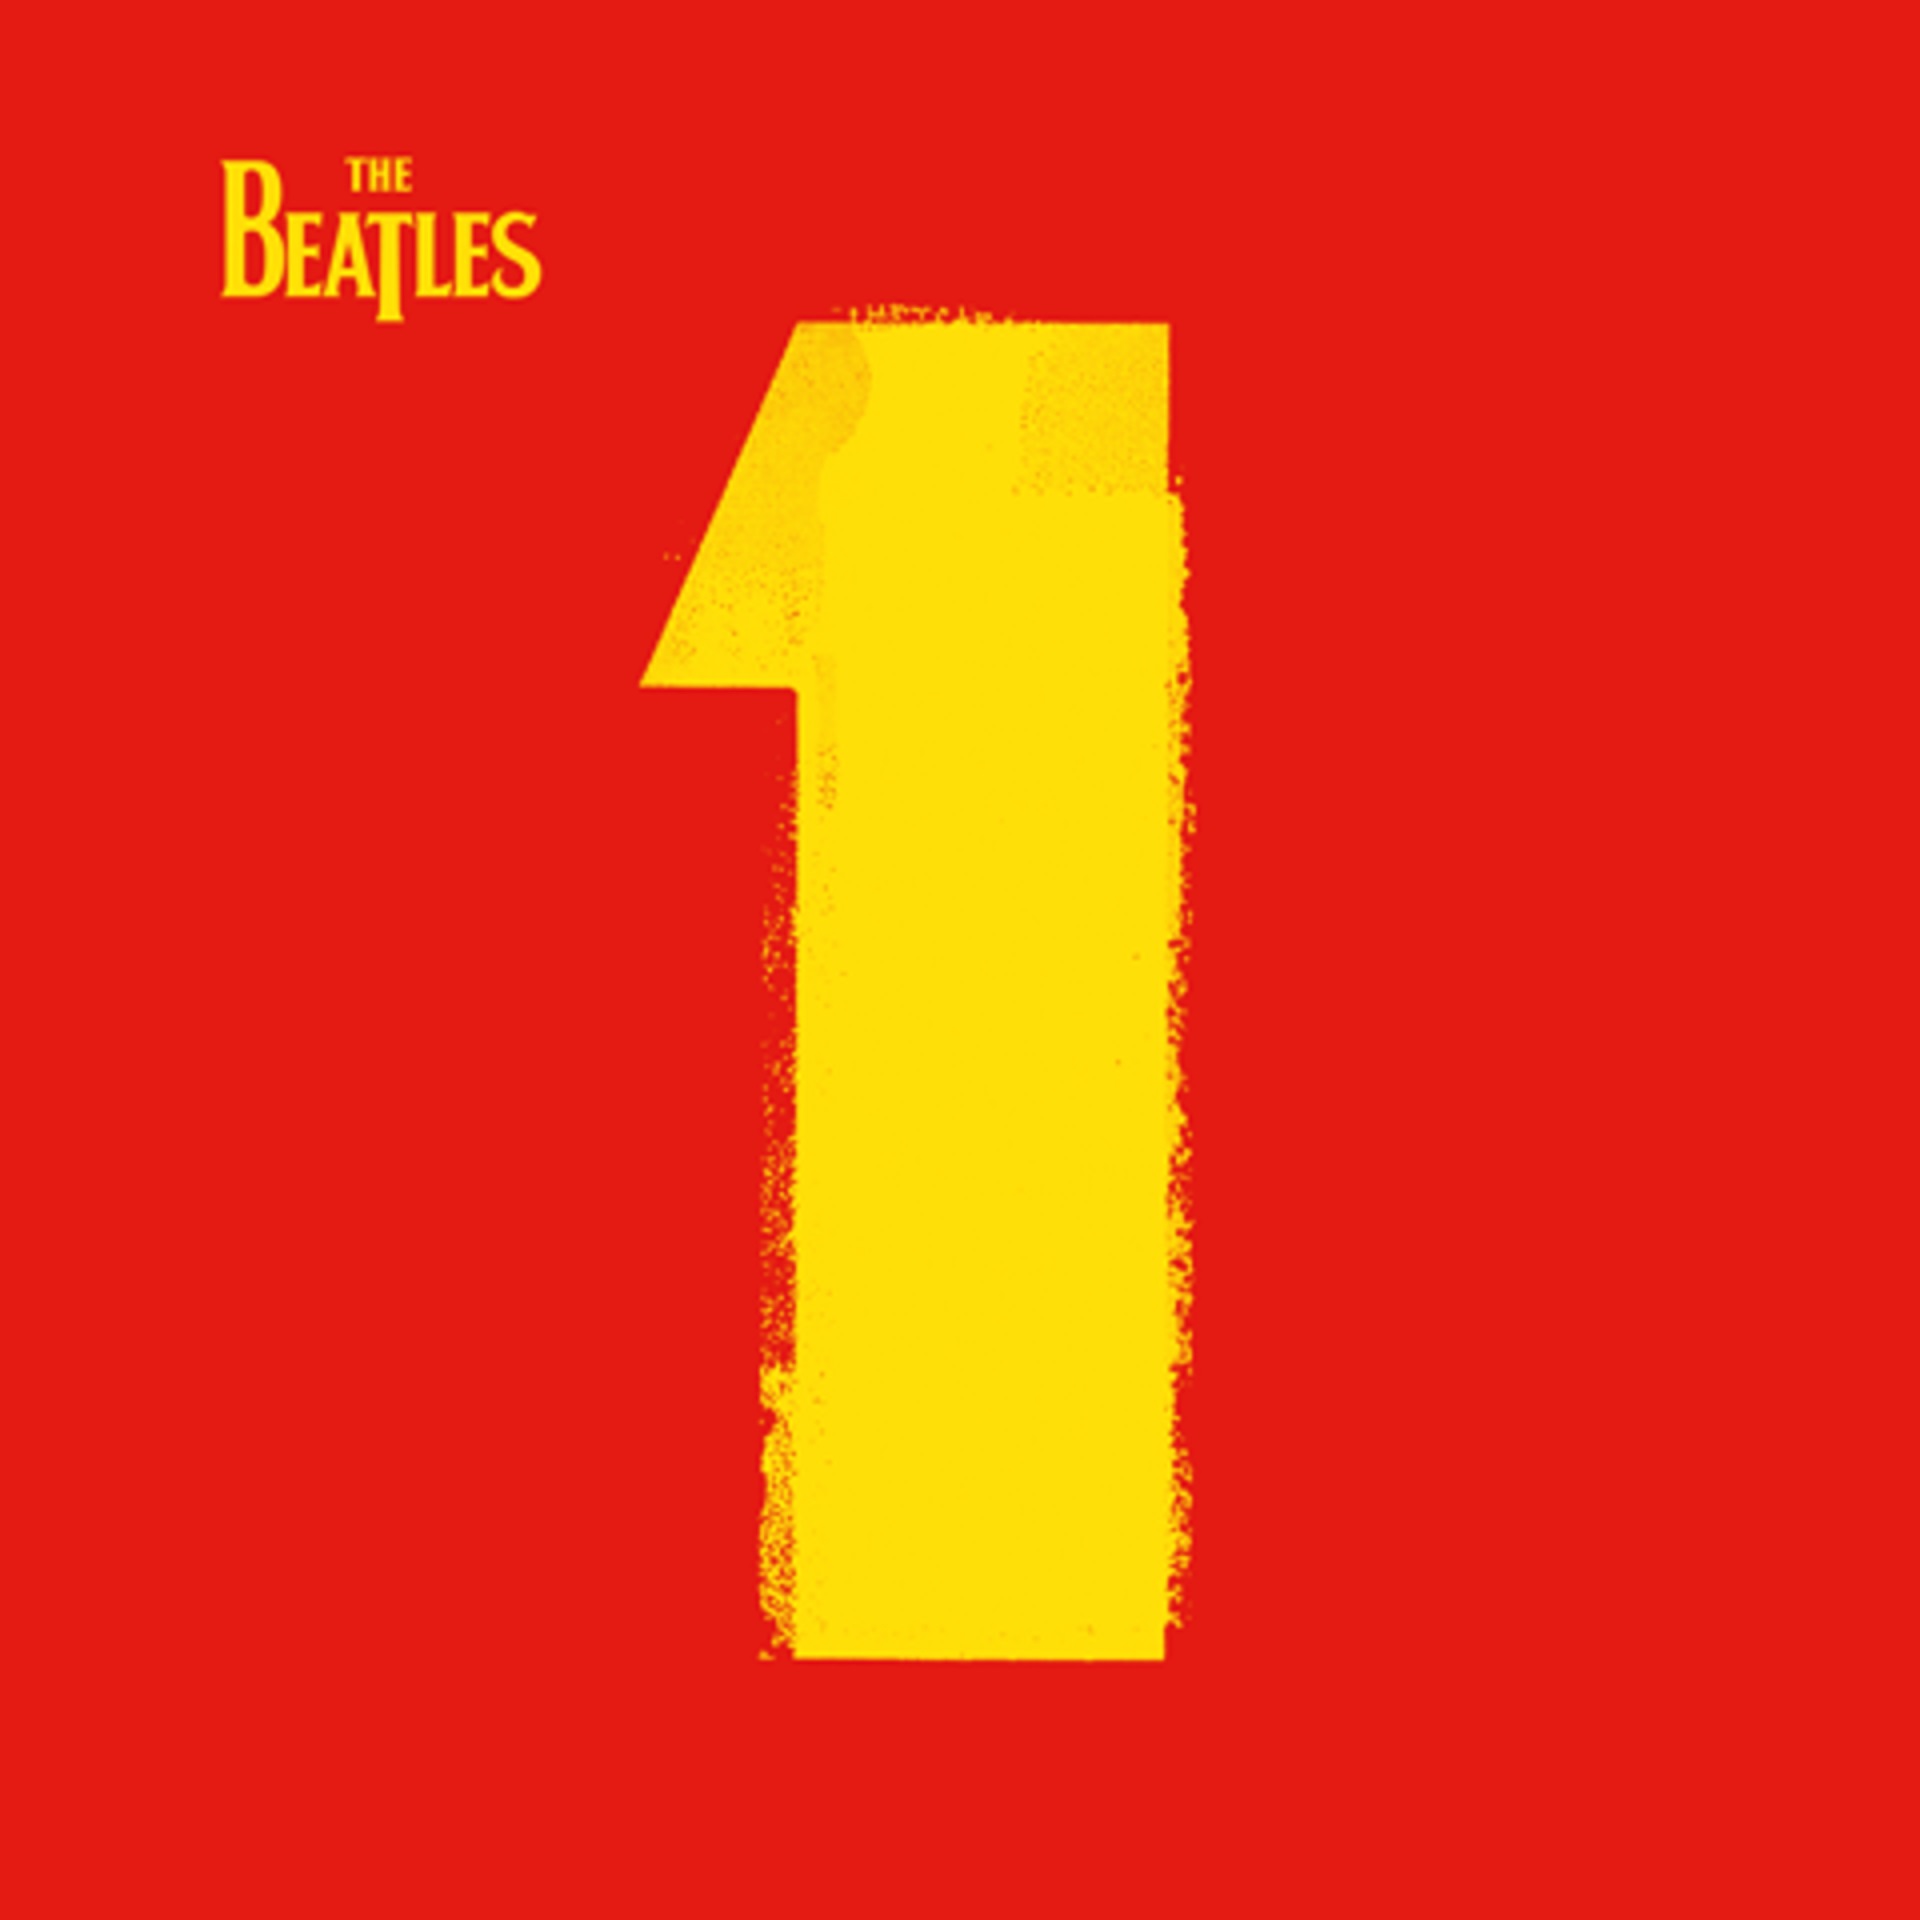 Giles Martin Tells Apple Music About Mixing The Beatles '1' Album in Spatial Audio and The Journey of Bringing New Technology To The Band's Iconic Catalog